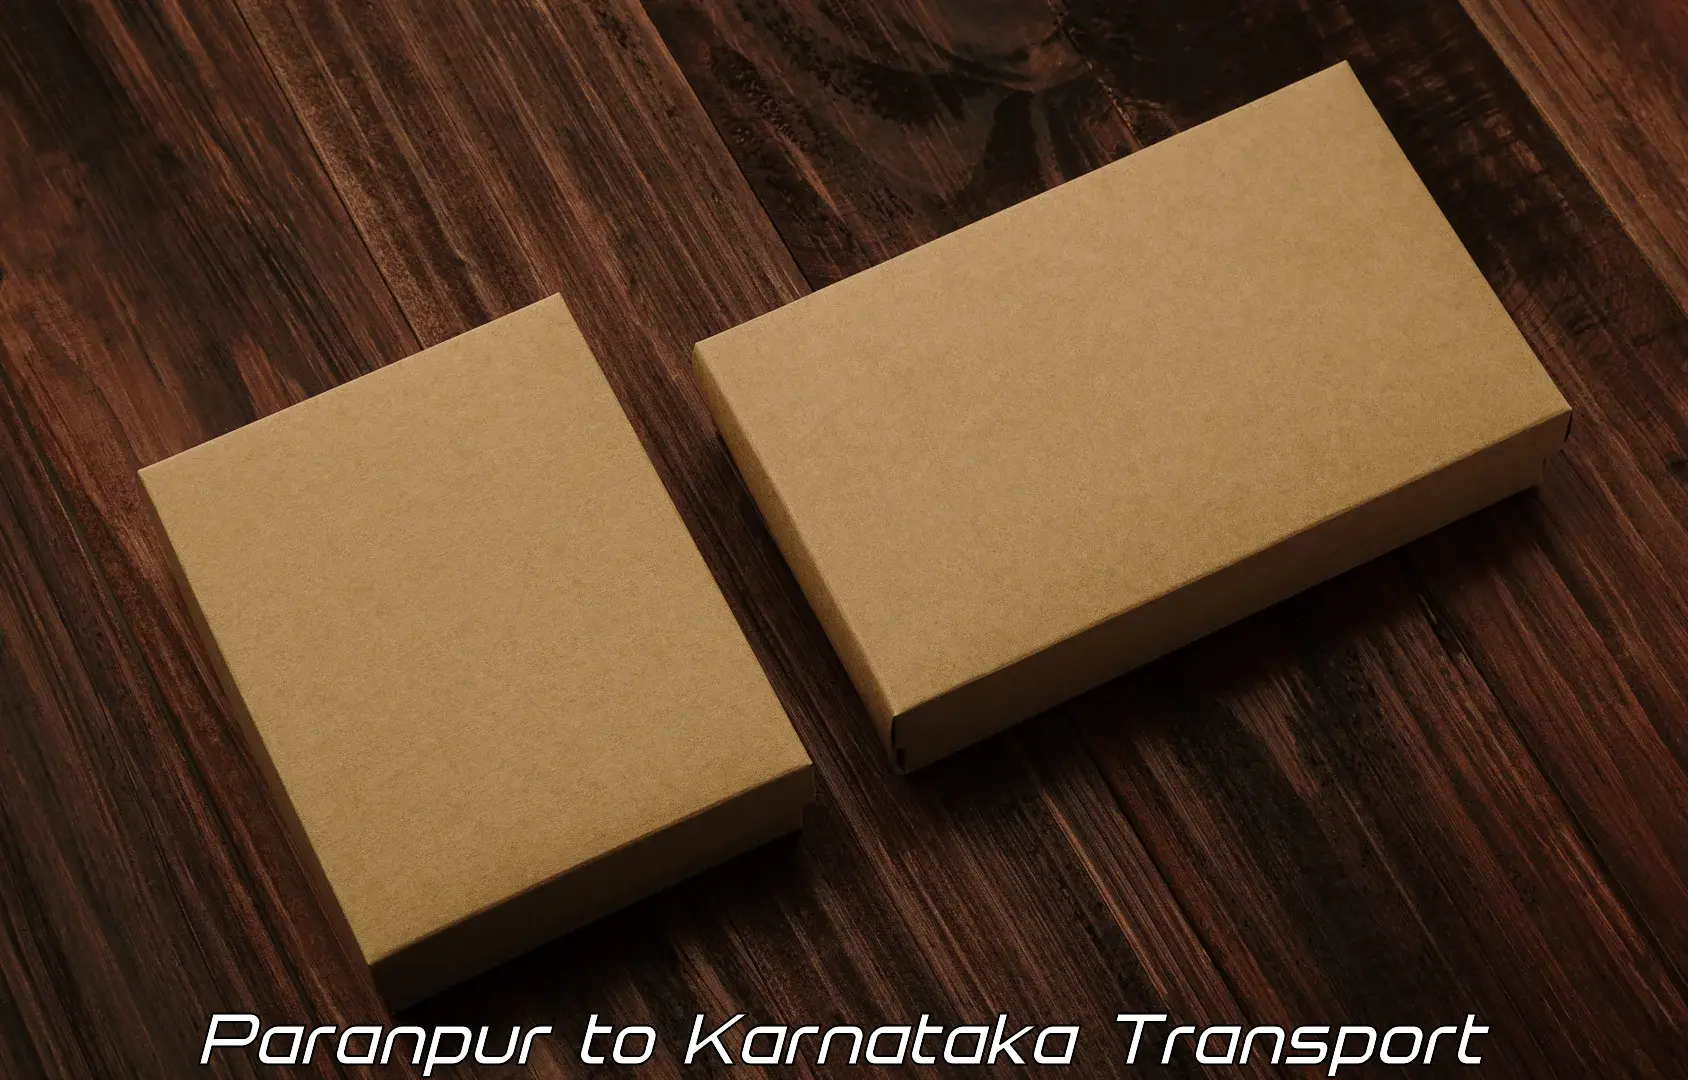 Vehicle transport services Paranpur to Ullal